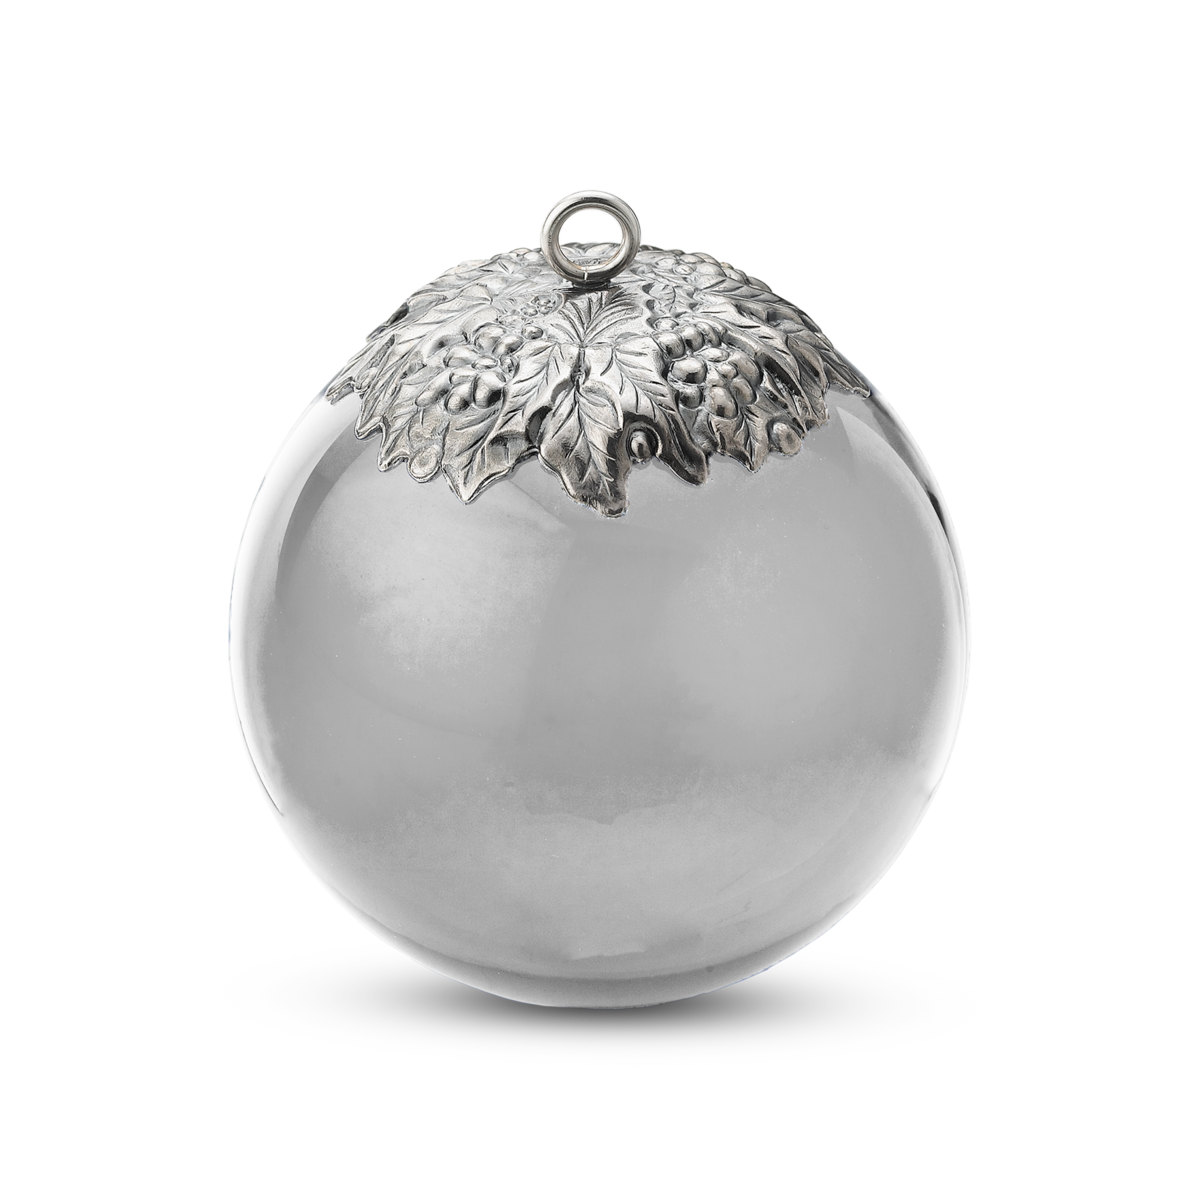 Bauble Silver Christmas Free Download Image PNG Image